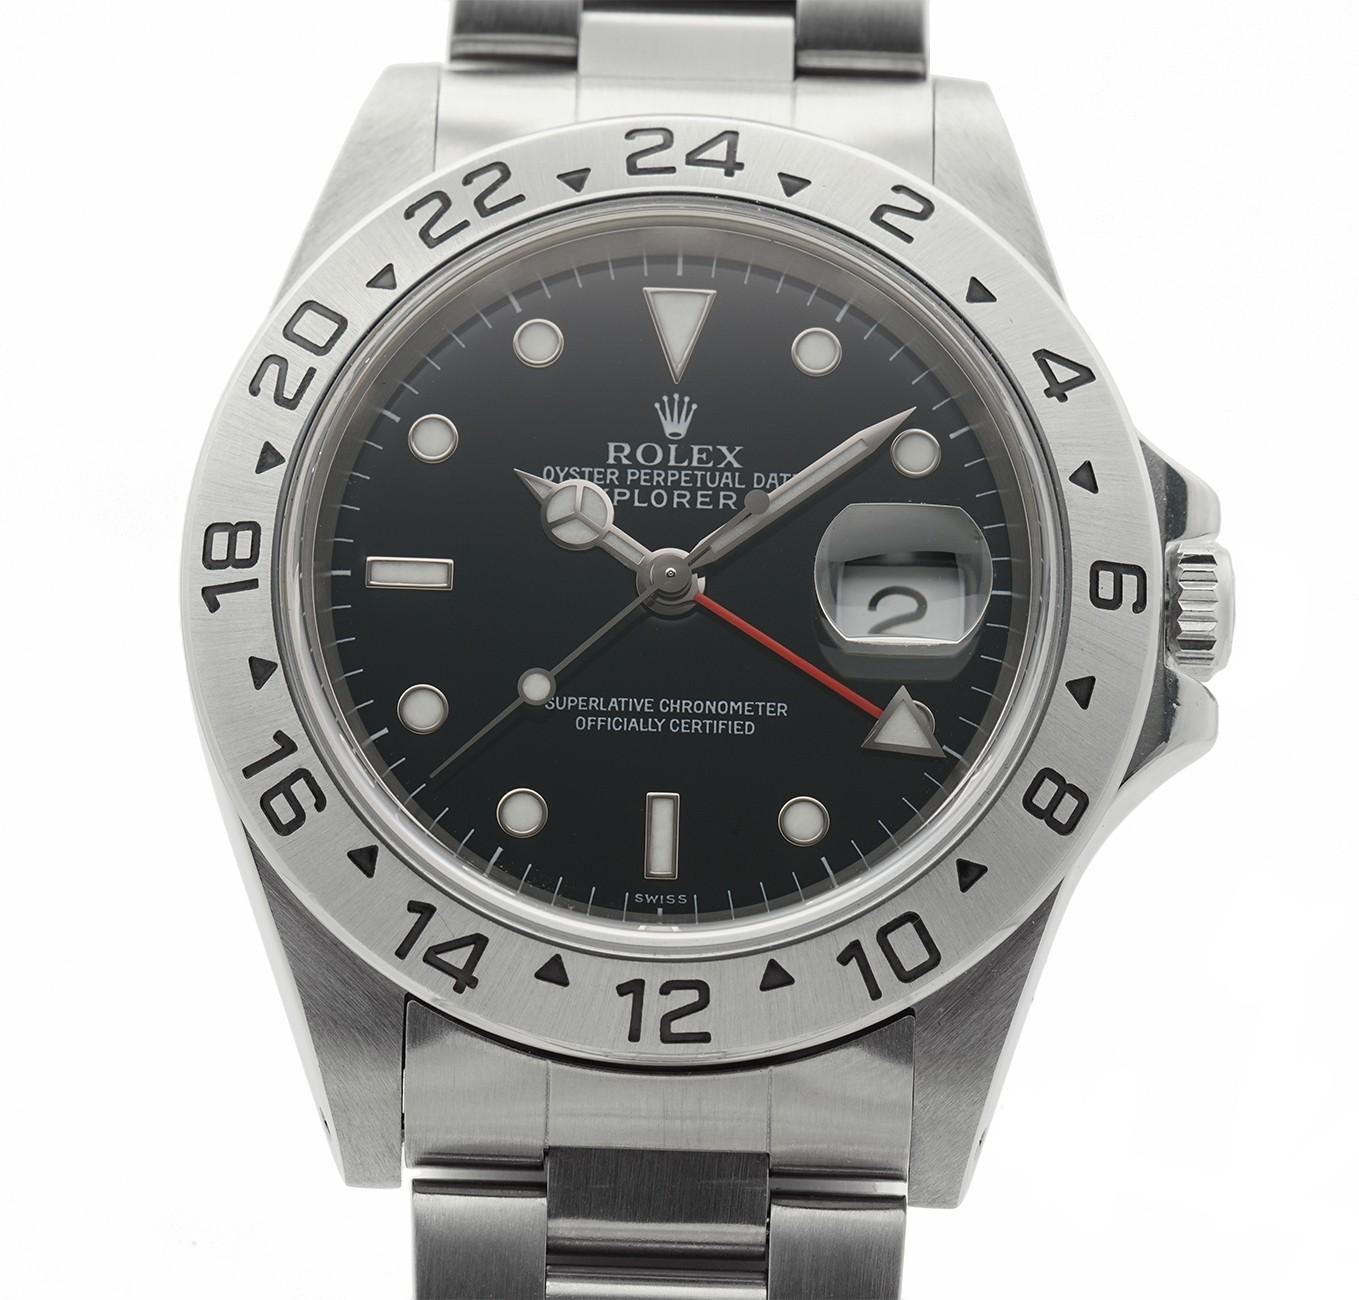 Rolex Explorer II 16570, Black Dial, Certified and Warranty In Excellent Condition For Sale In Miami, FL